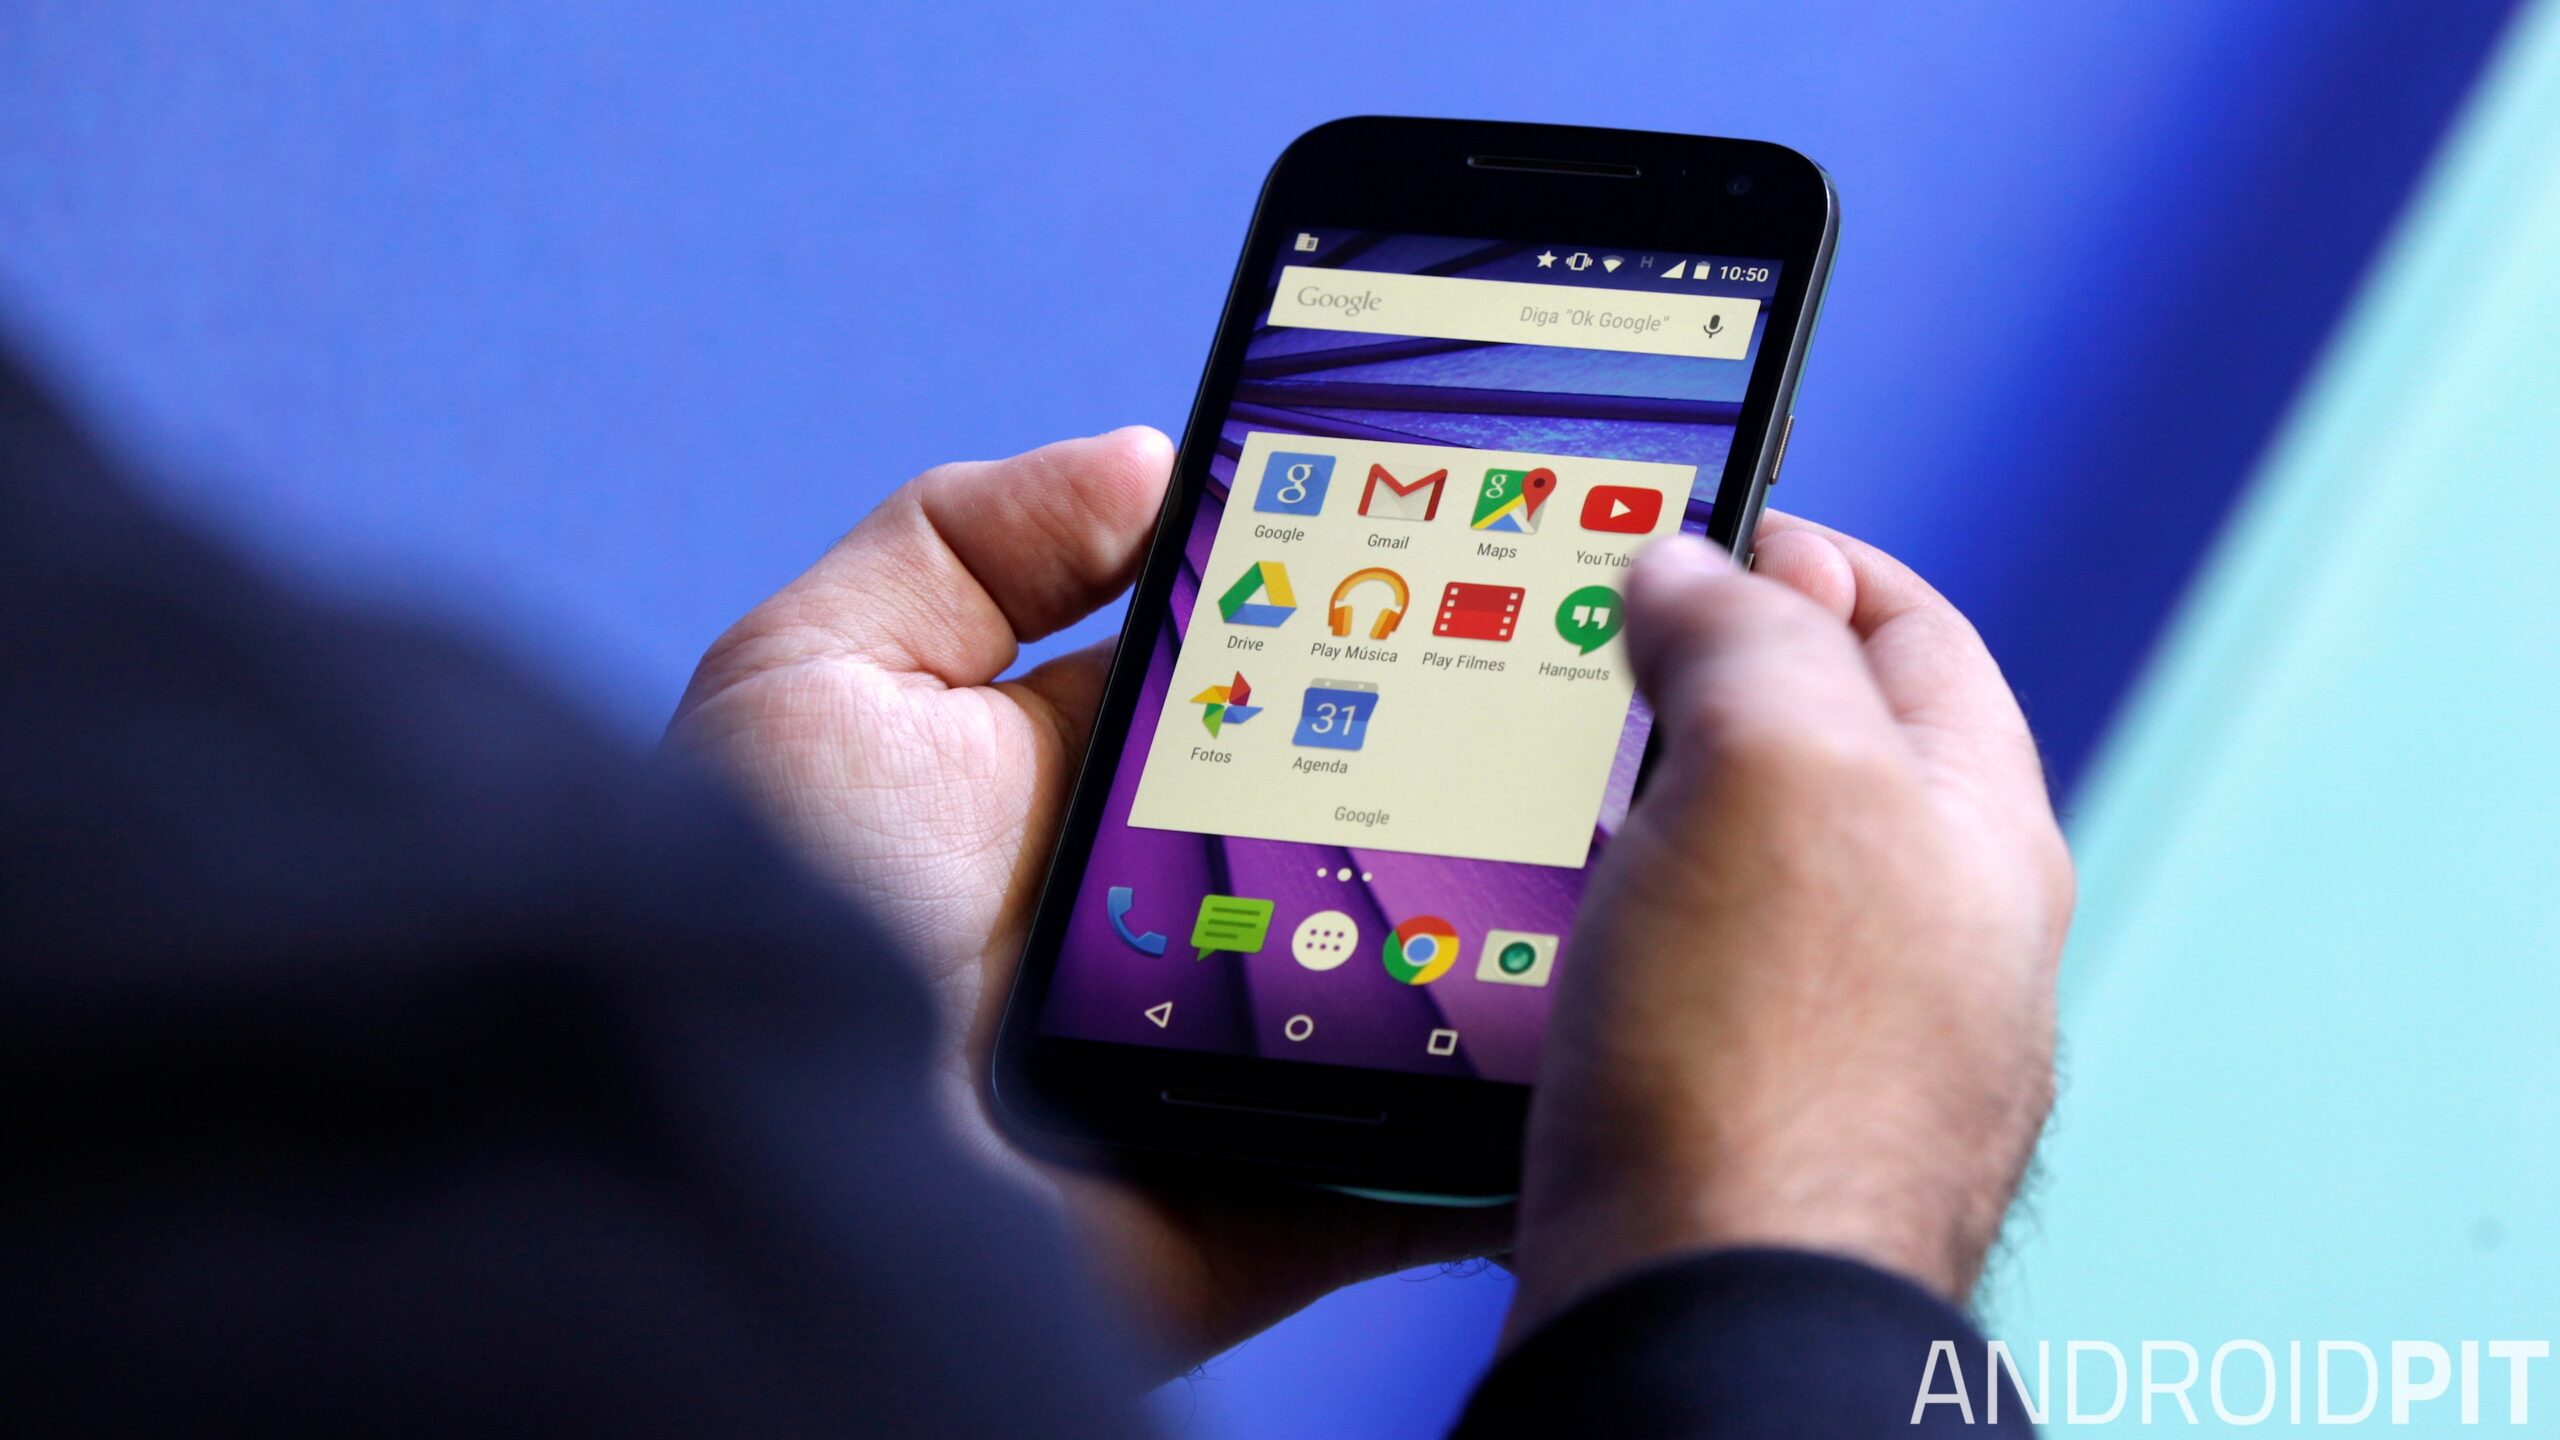 Moto G 2015: How to unlock bootloader, install TWRP Recovery and root device